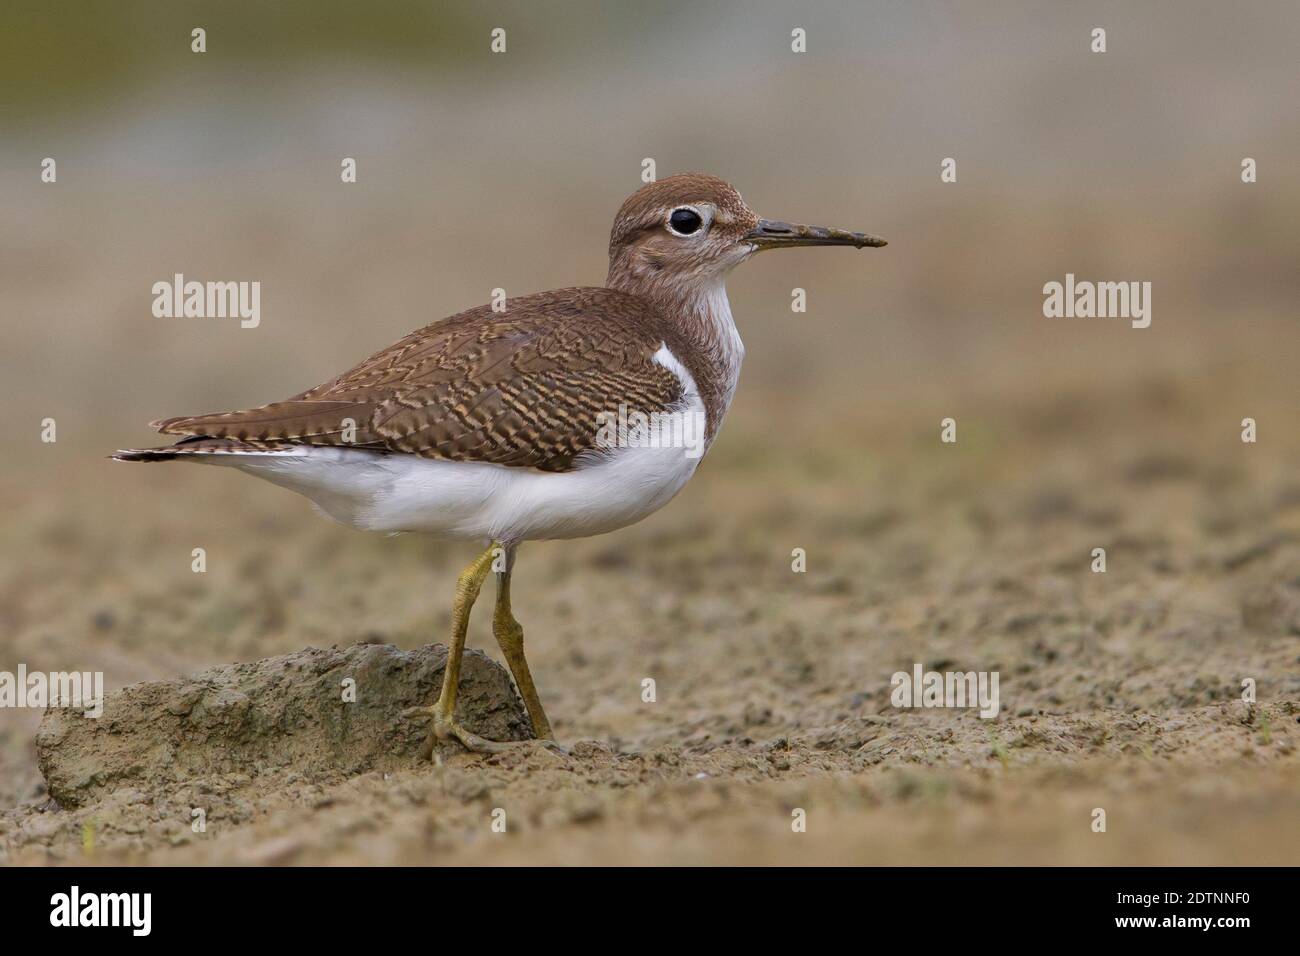 Common Sandpiper standing on the ground. Stock Photo